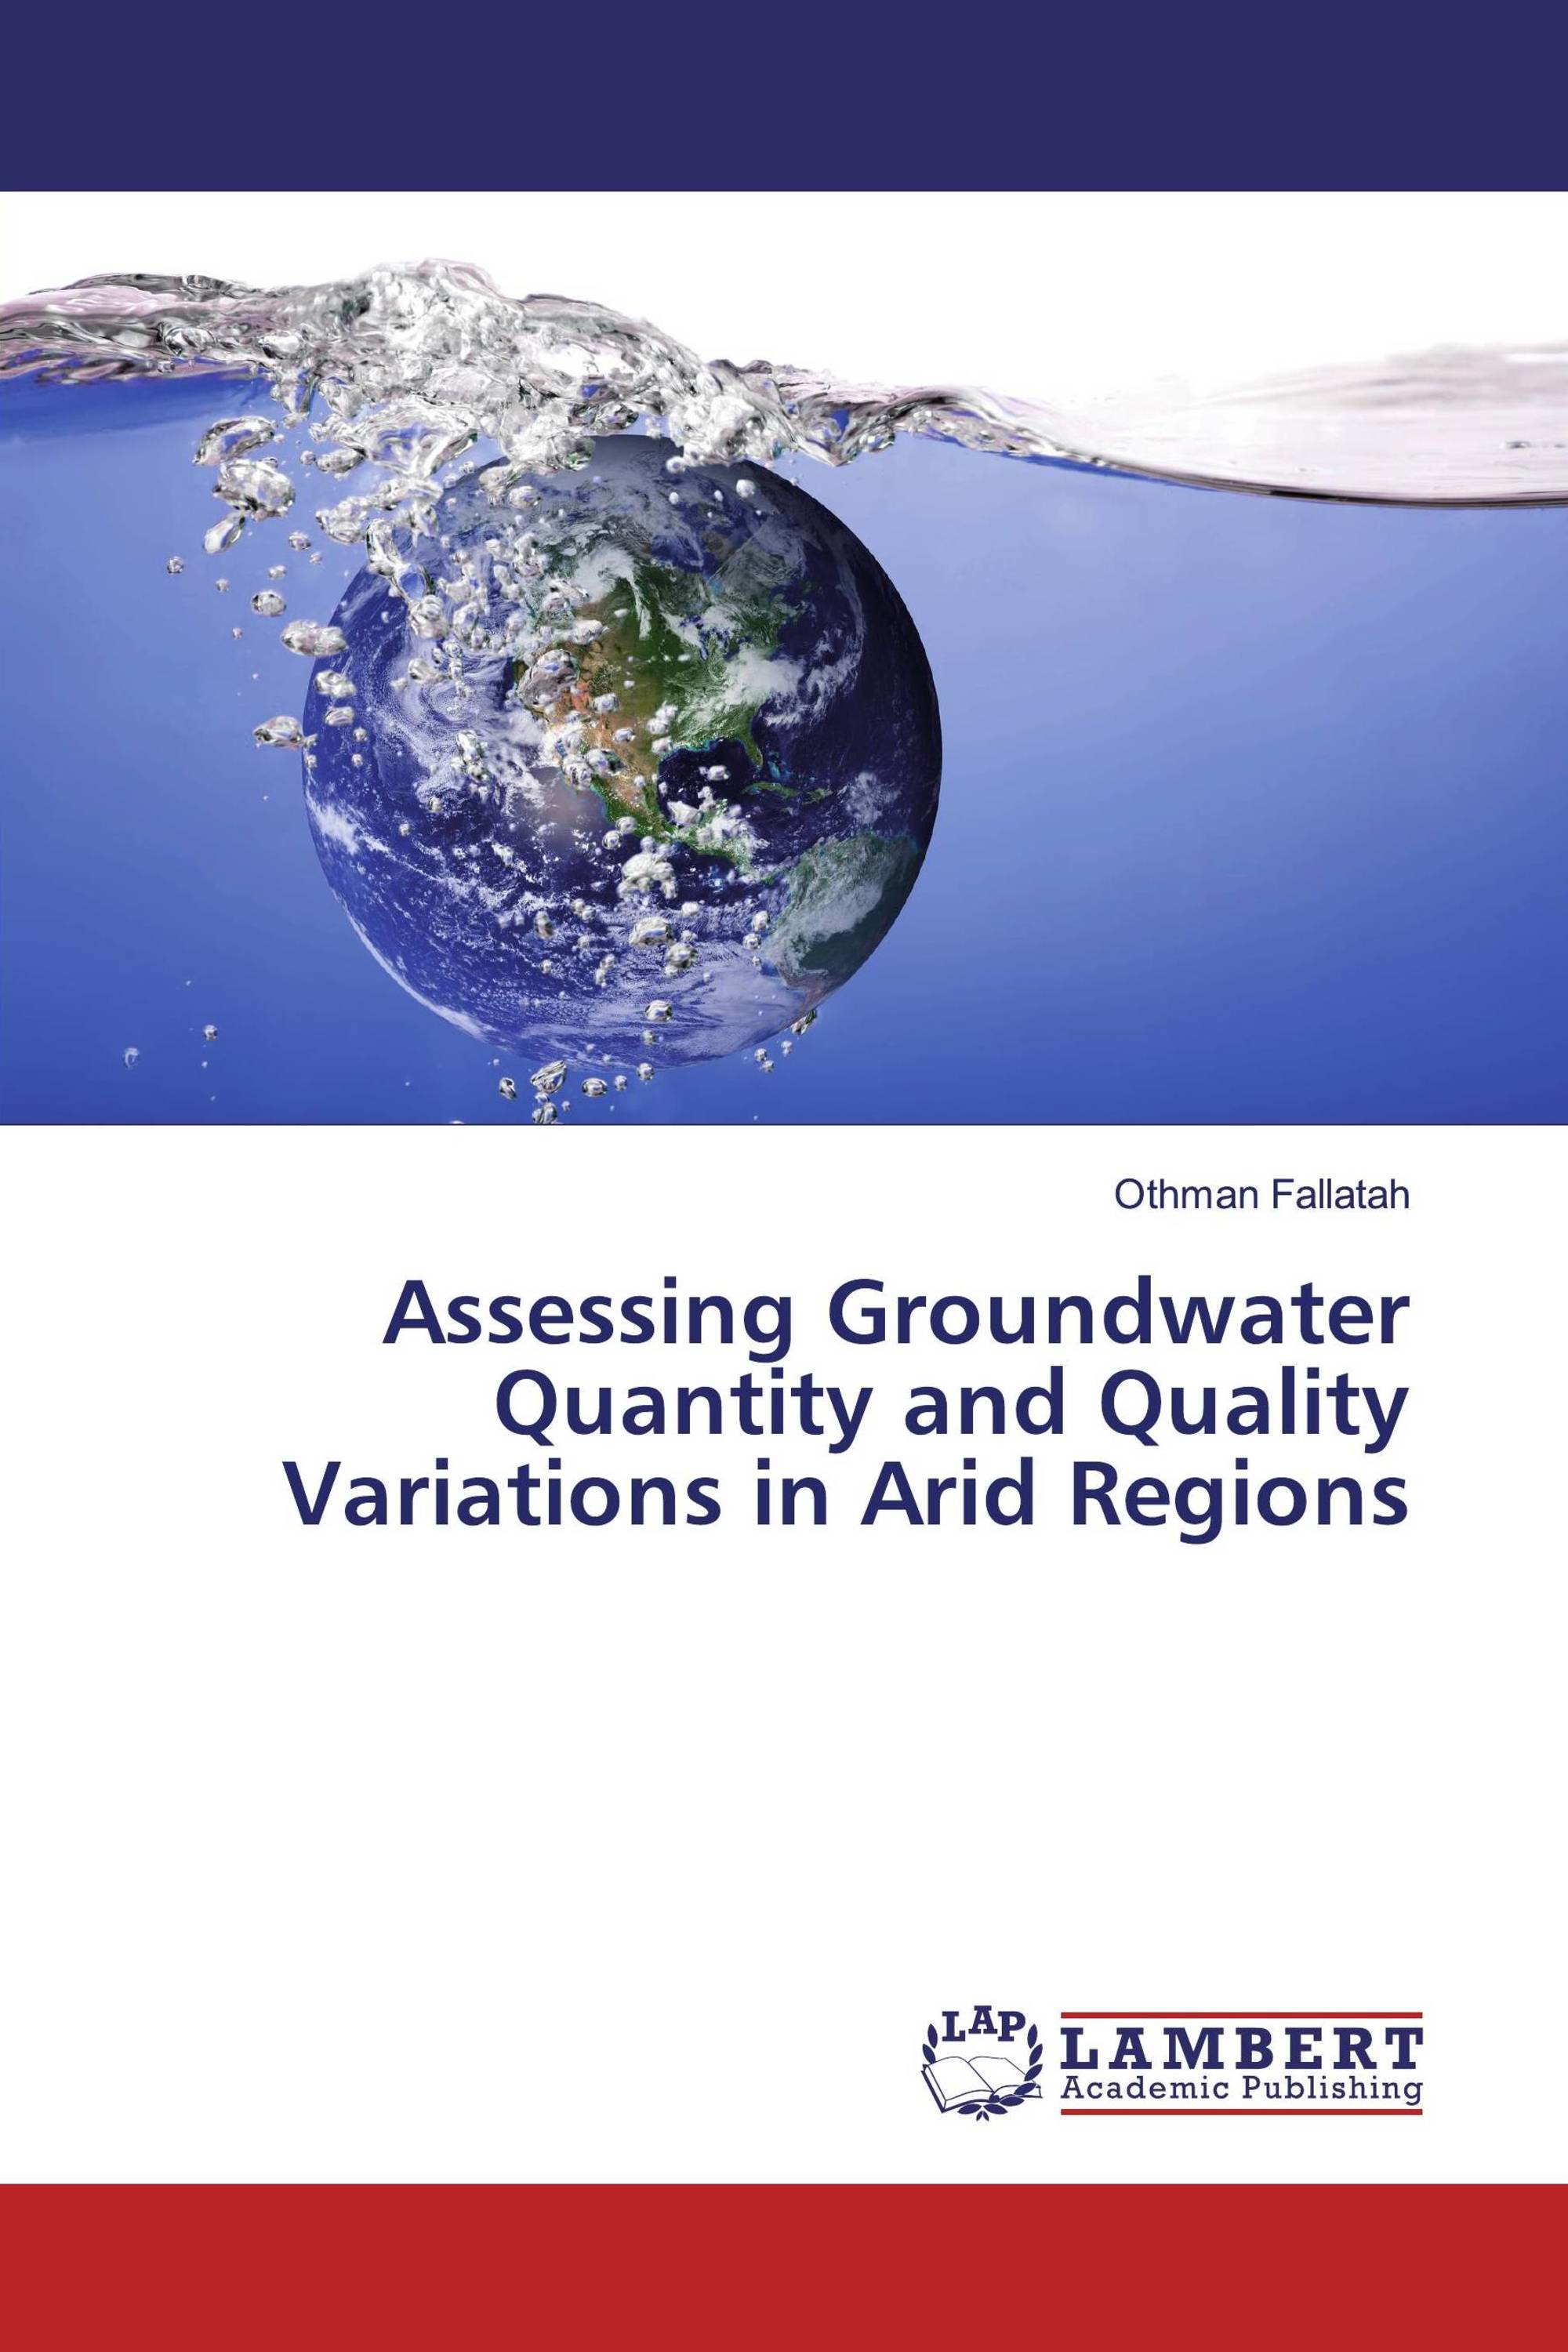 Assessing Groundwater Quantity and Quality Variations in Arid Regions